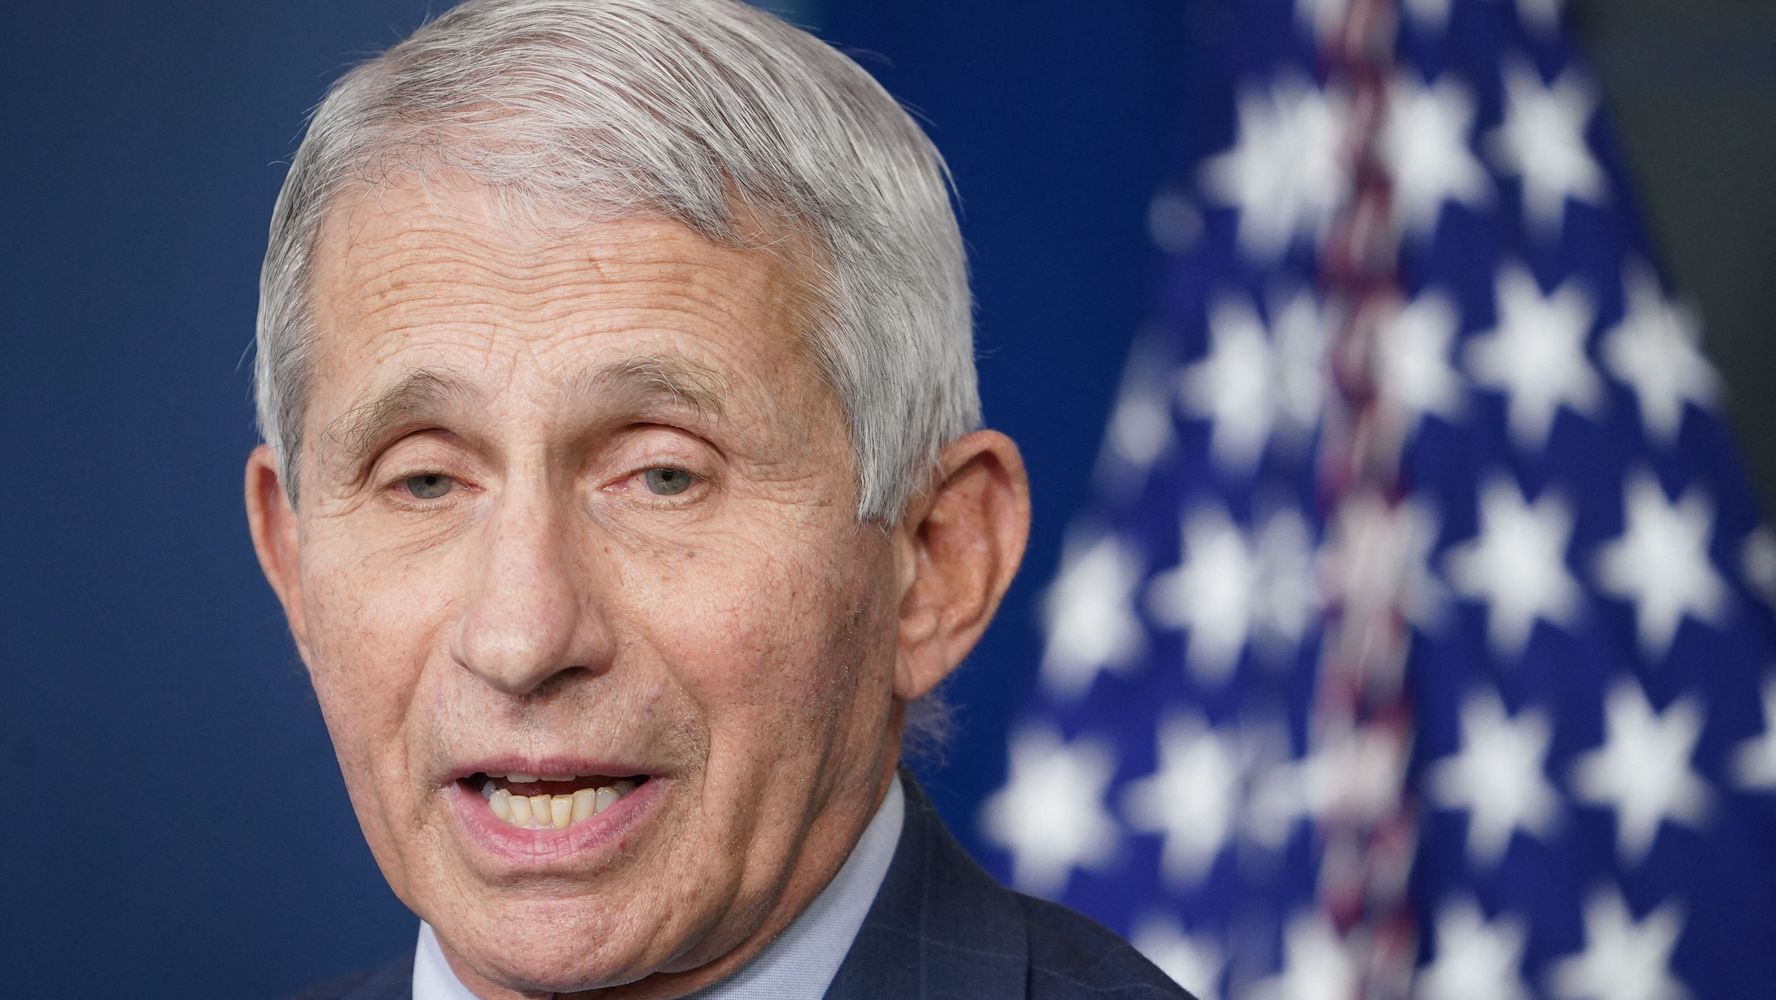 Fauci Fires Back At GOP Sen. Ron Johnson's 'Preposterous' Claim He Overhyped AIDS